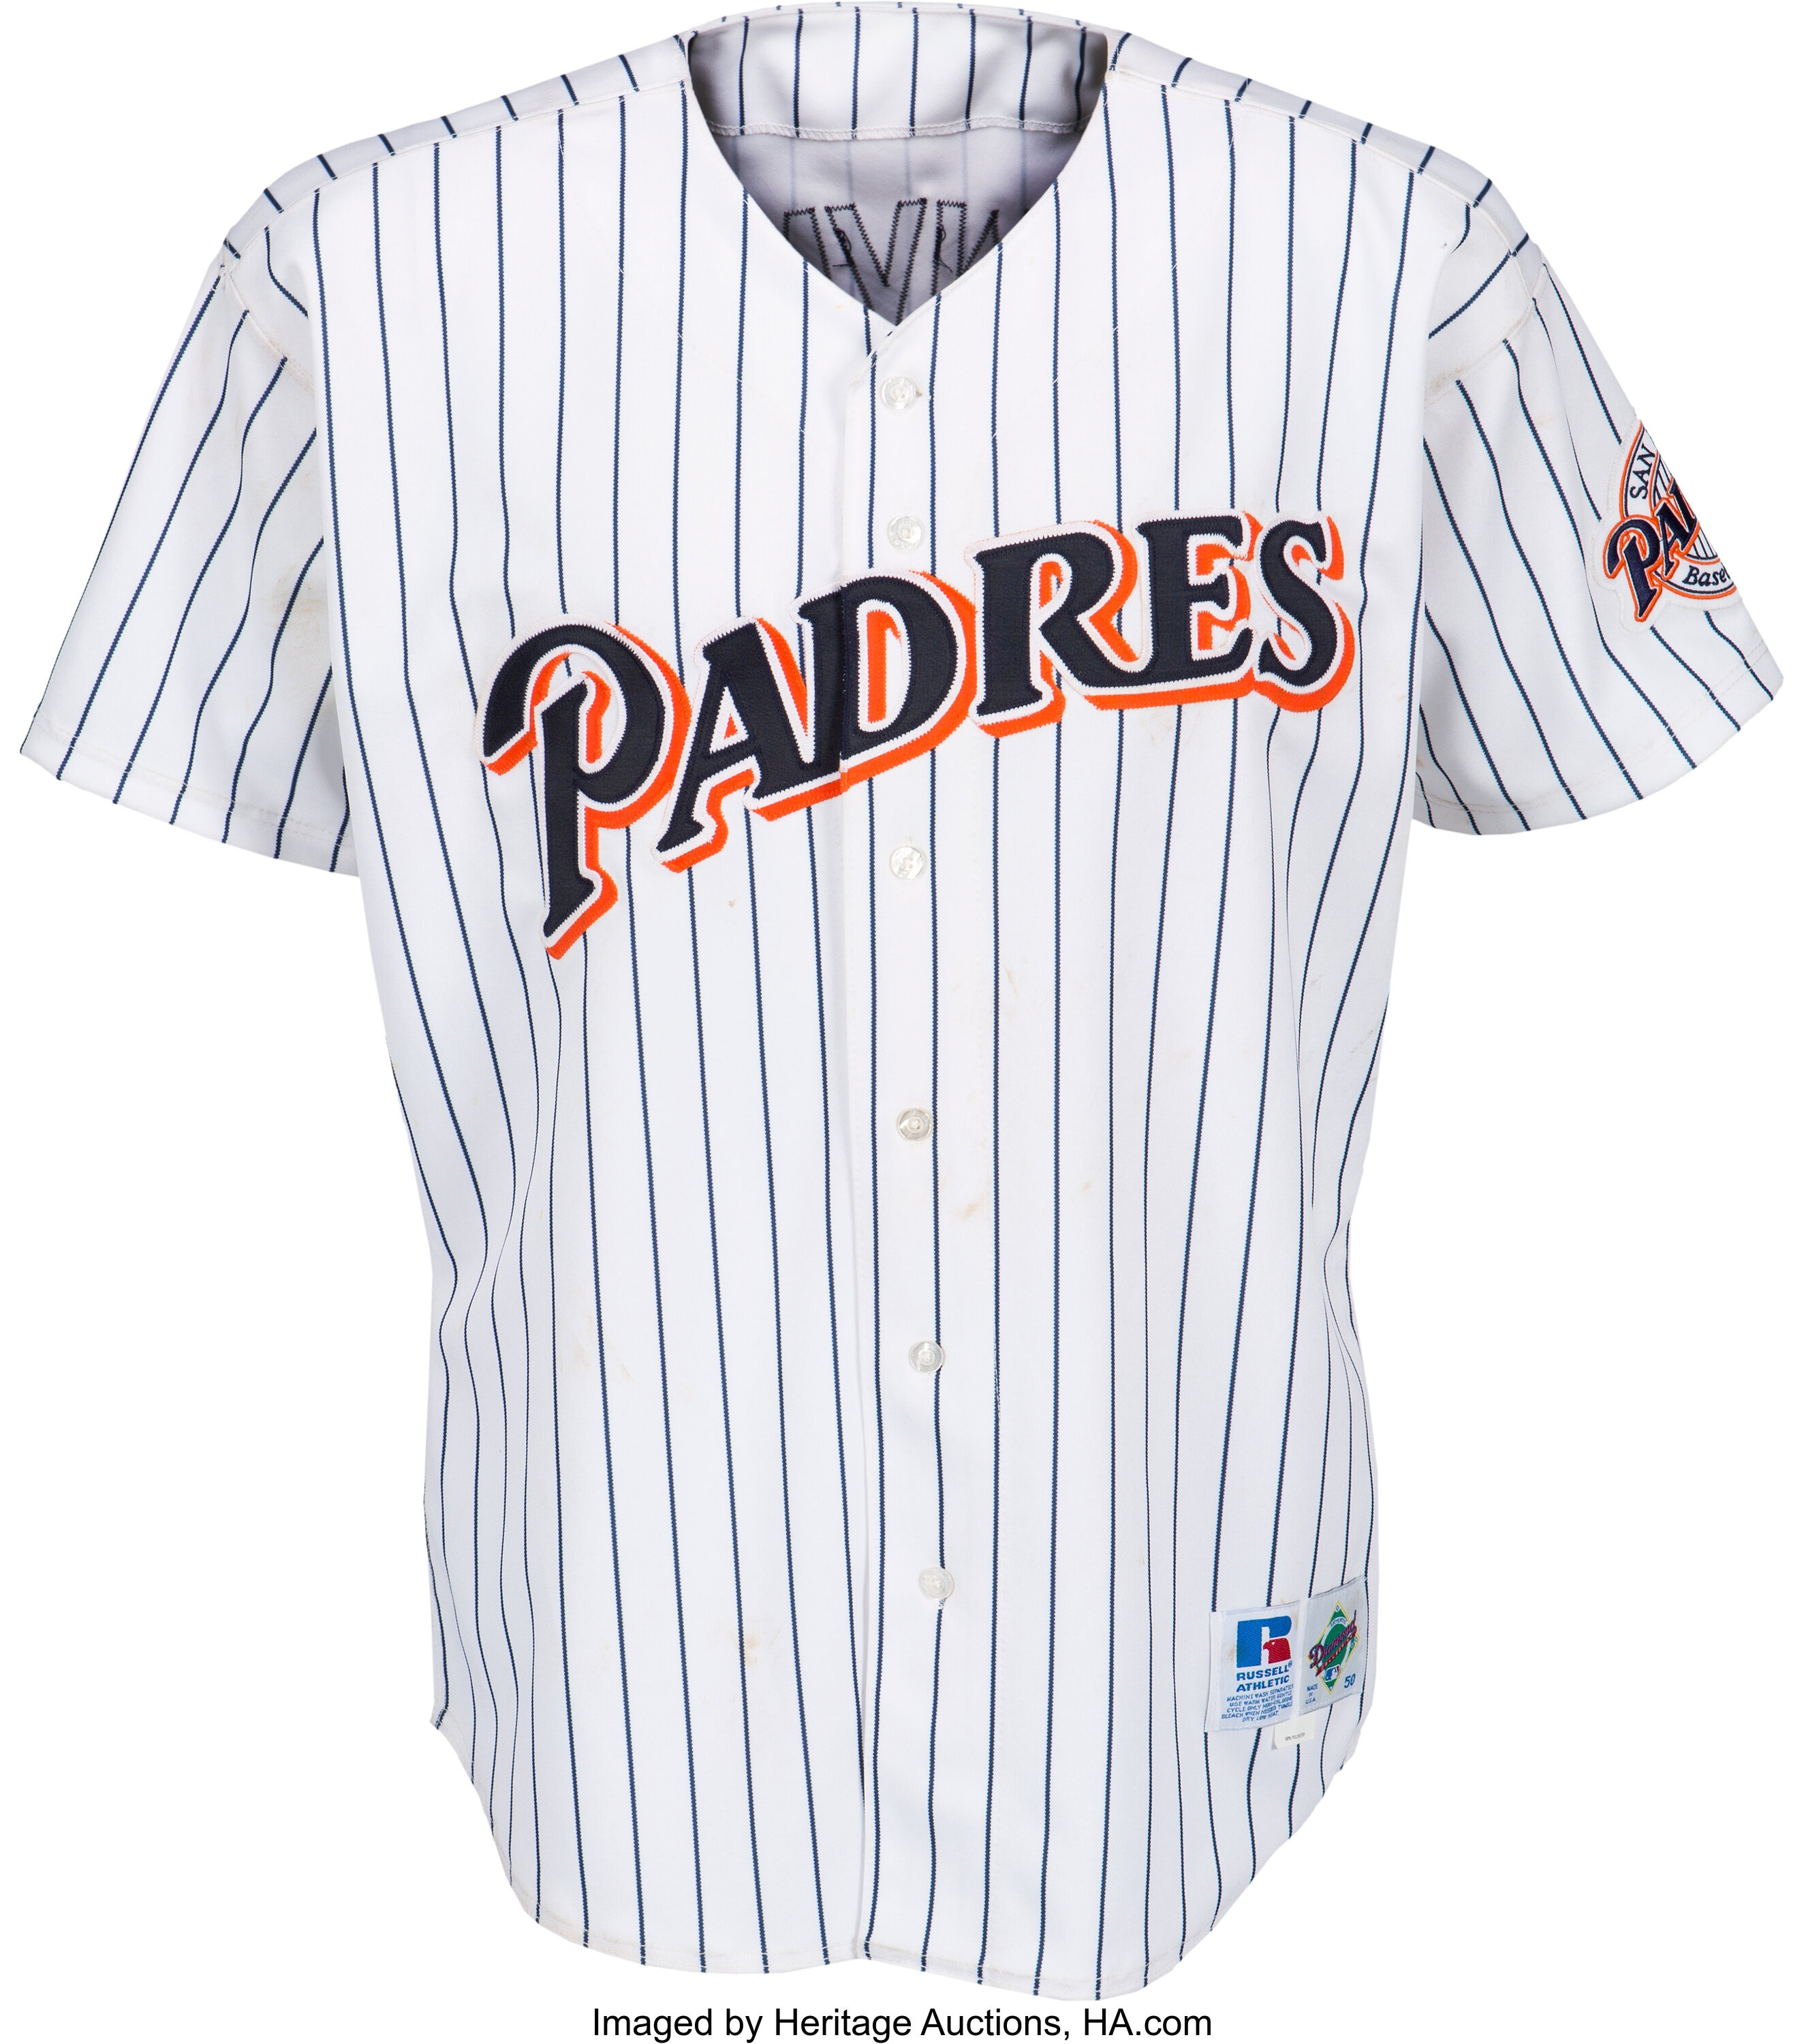 Pics: San Diego Padres in 1990s Throwback Uniforms – SportsLogos.Net News